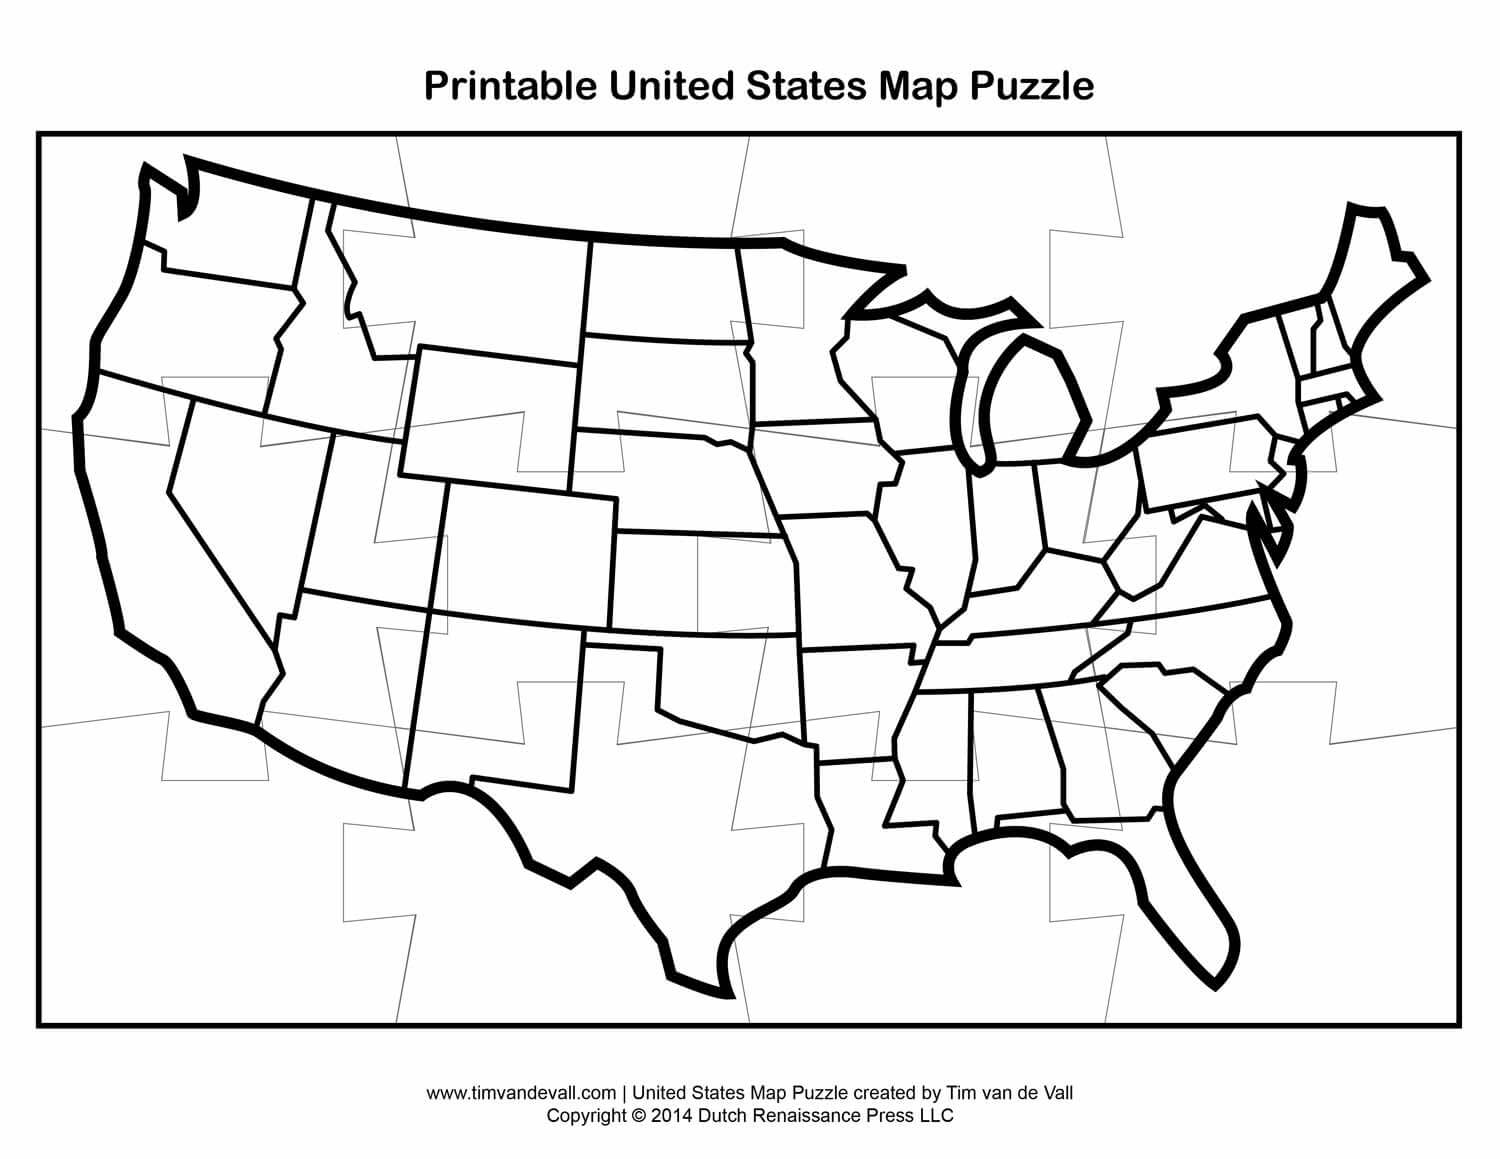 Coloring Book : Printable United States Map Puzzle For Kids With Blank Template Of The United States